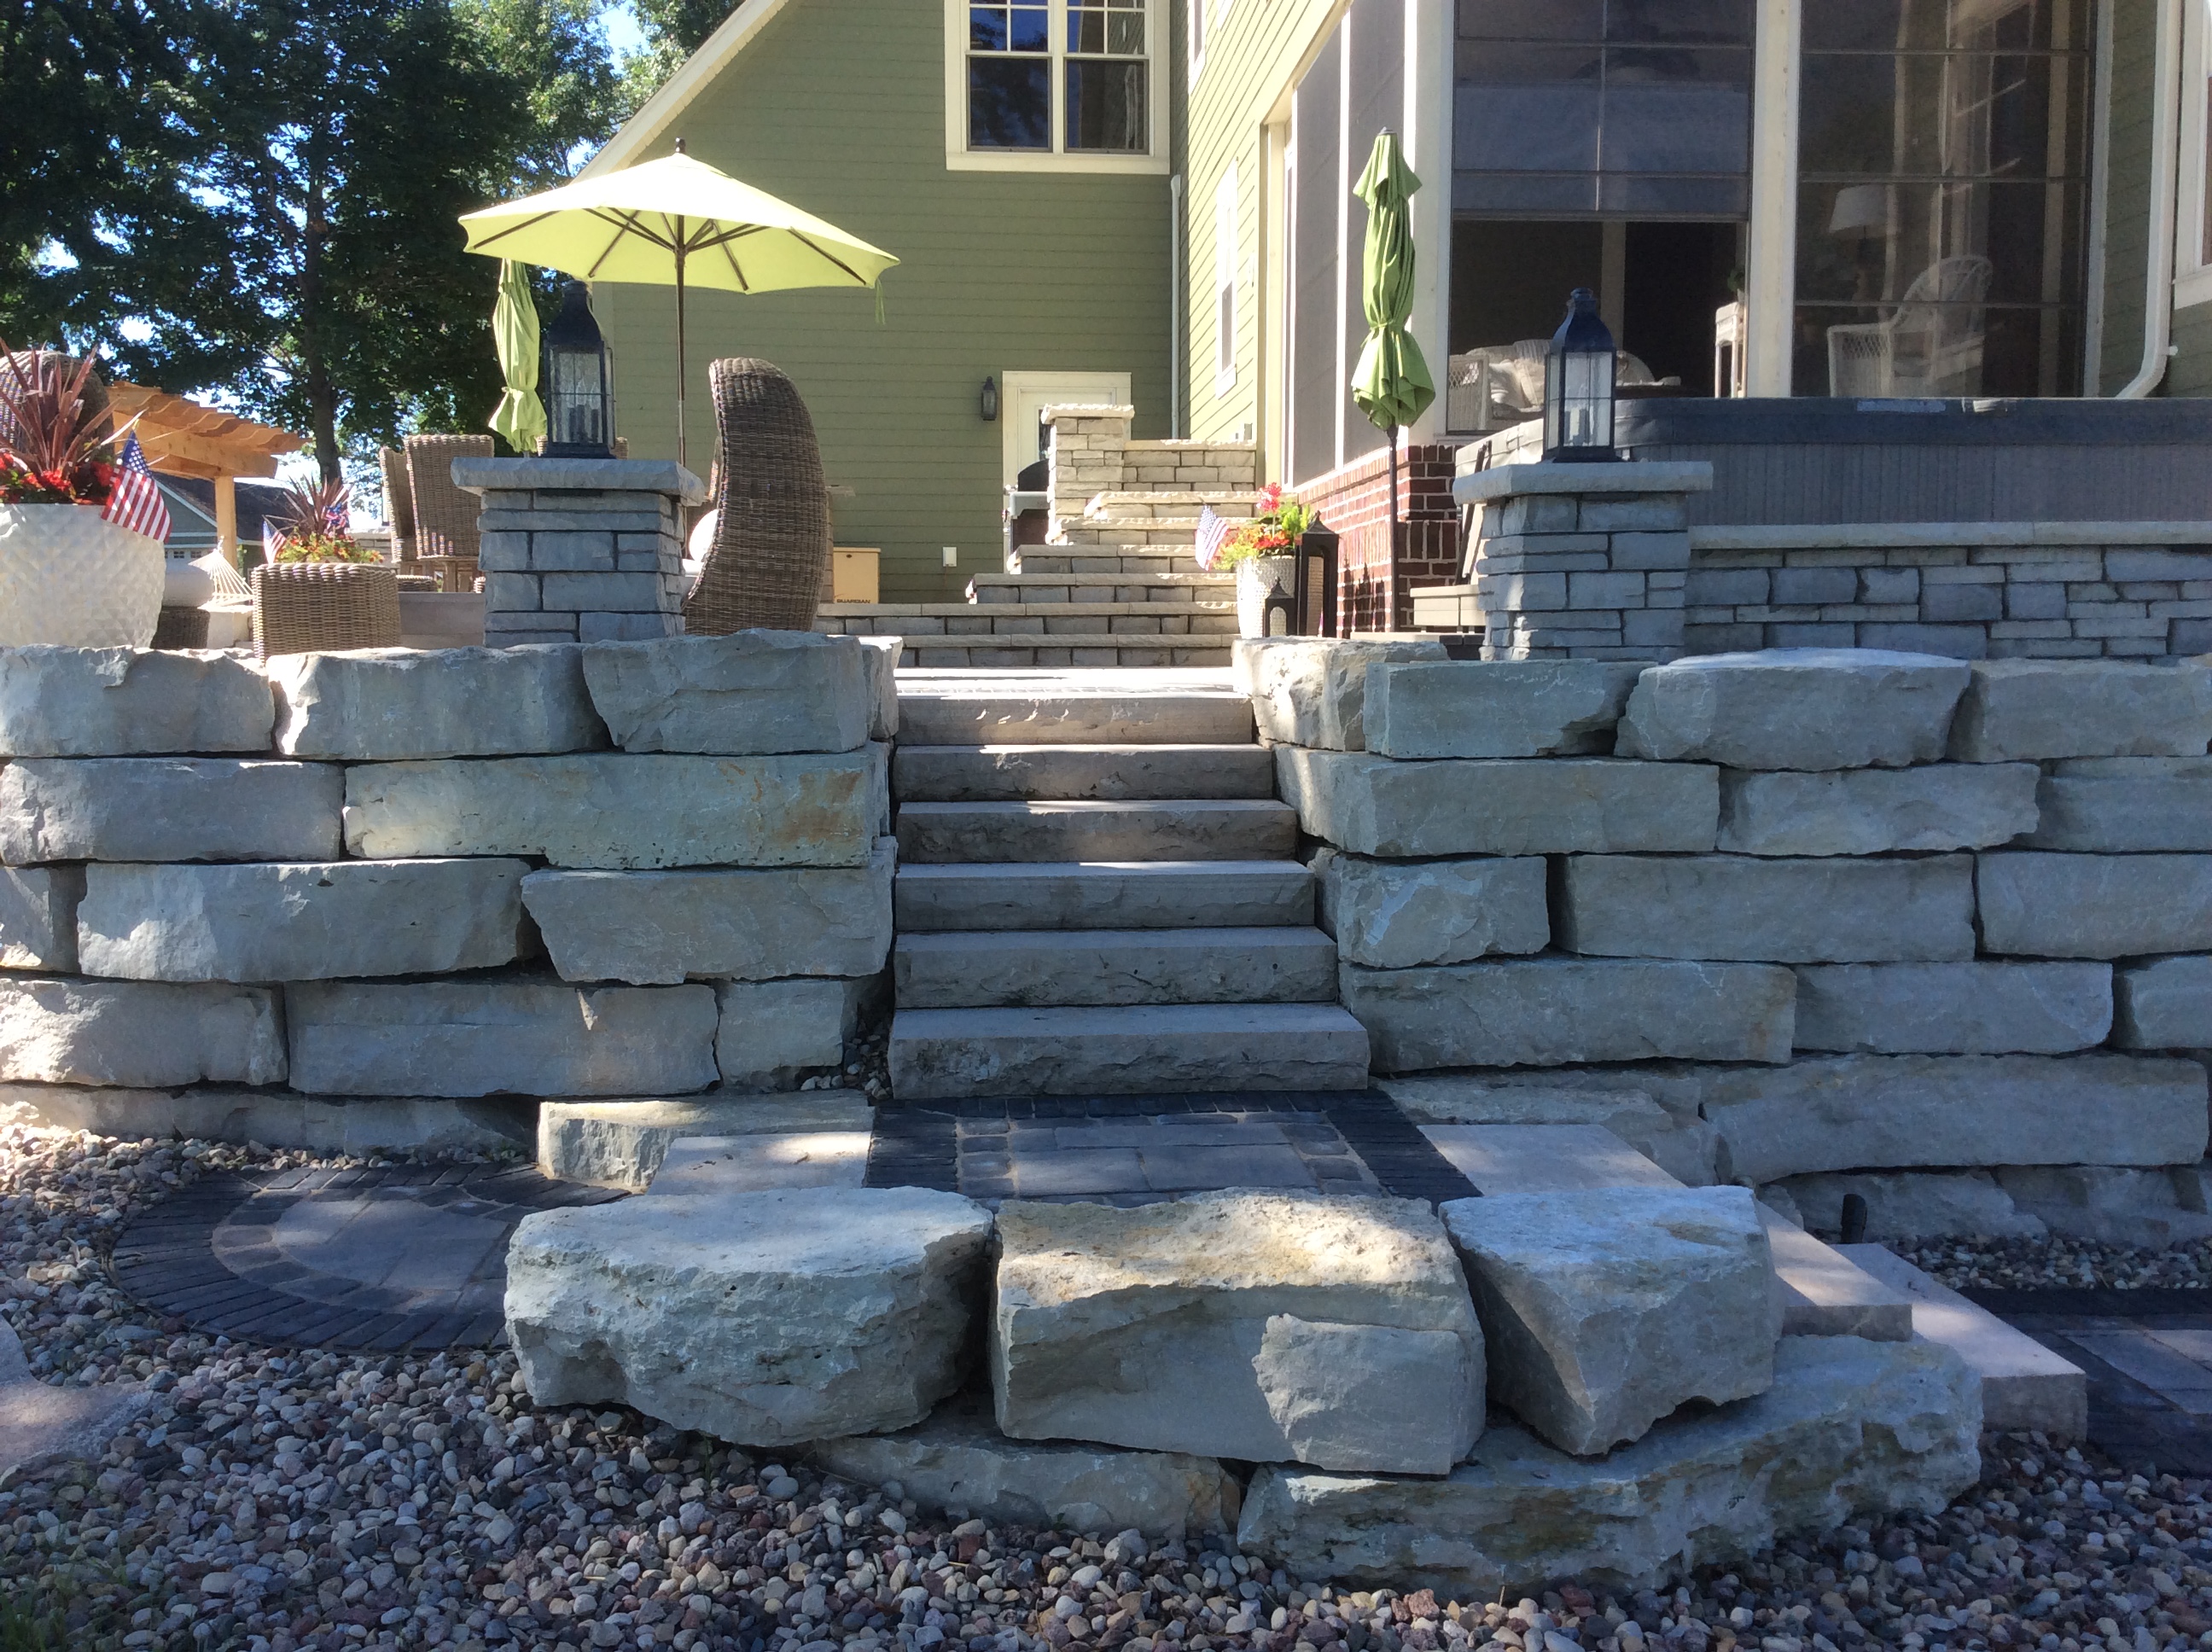 stacked stone retaining wall with stone steps leading to patio seating area